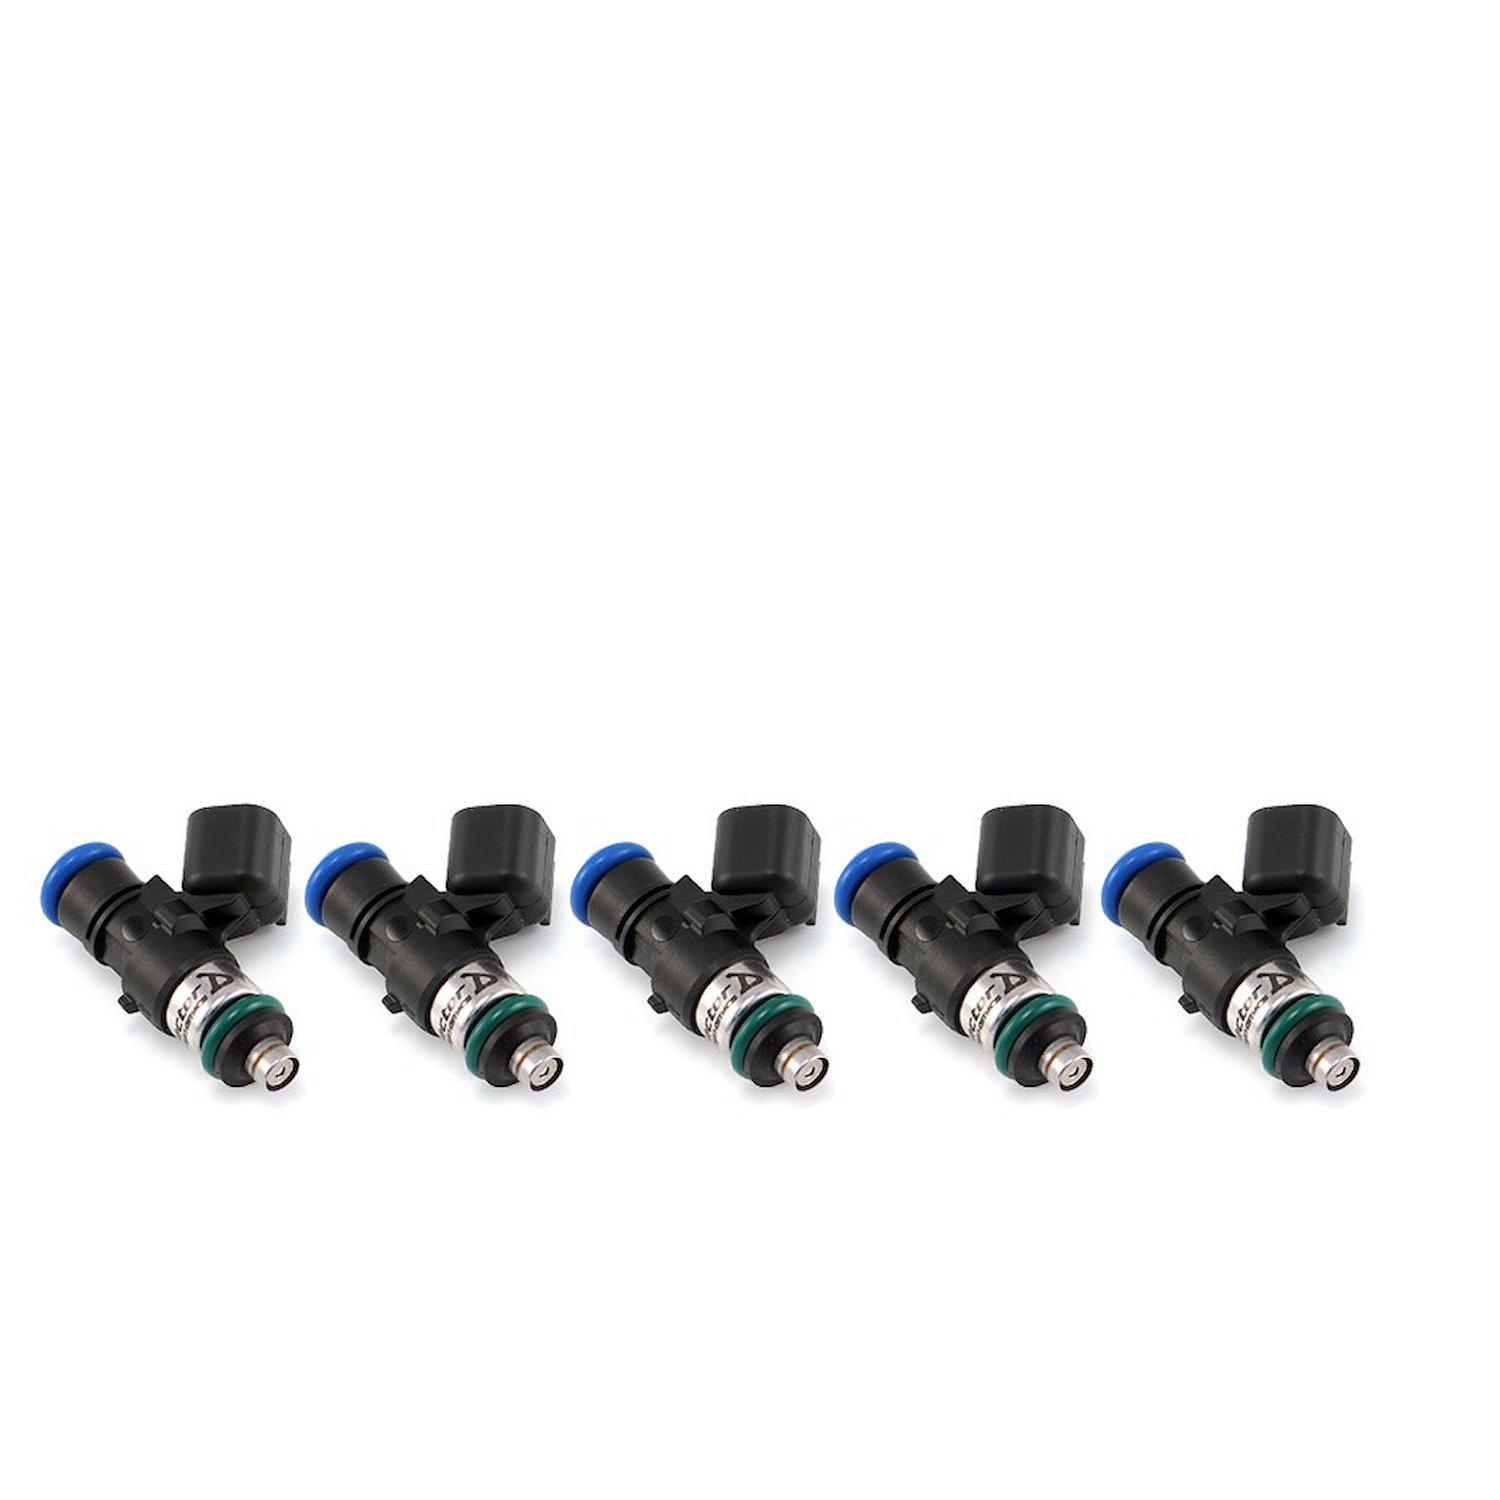 2600.34.14.14.5 2600cc Fuel Injector Set, 34 mm Length (No Adapters), 14 mm Lower O-Ring